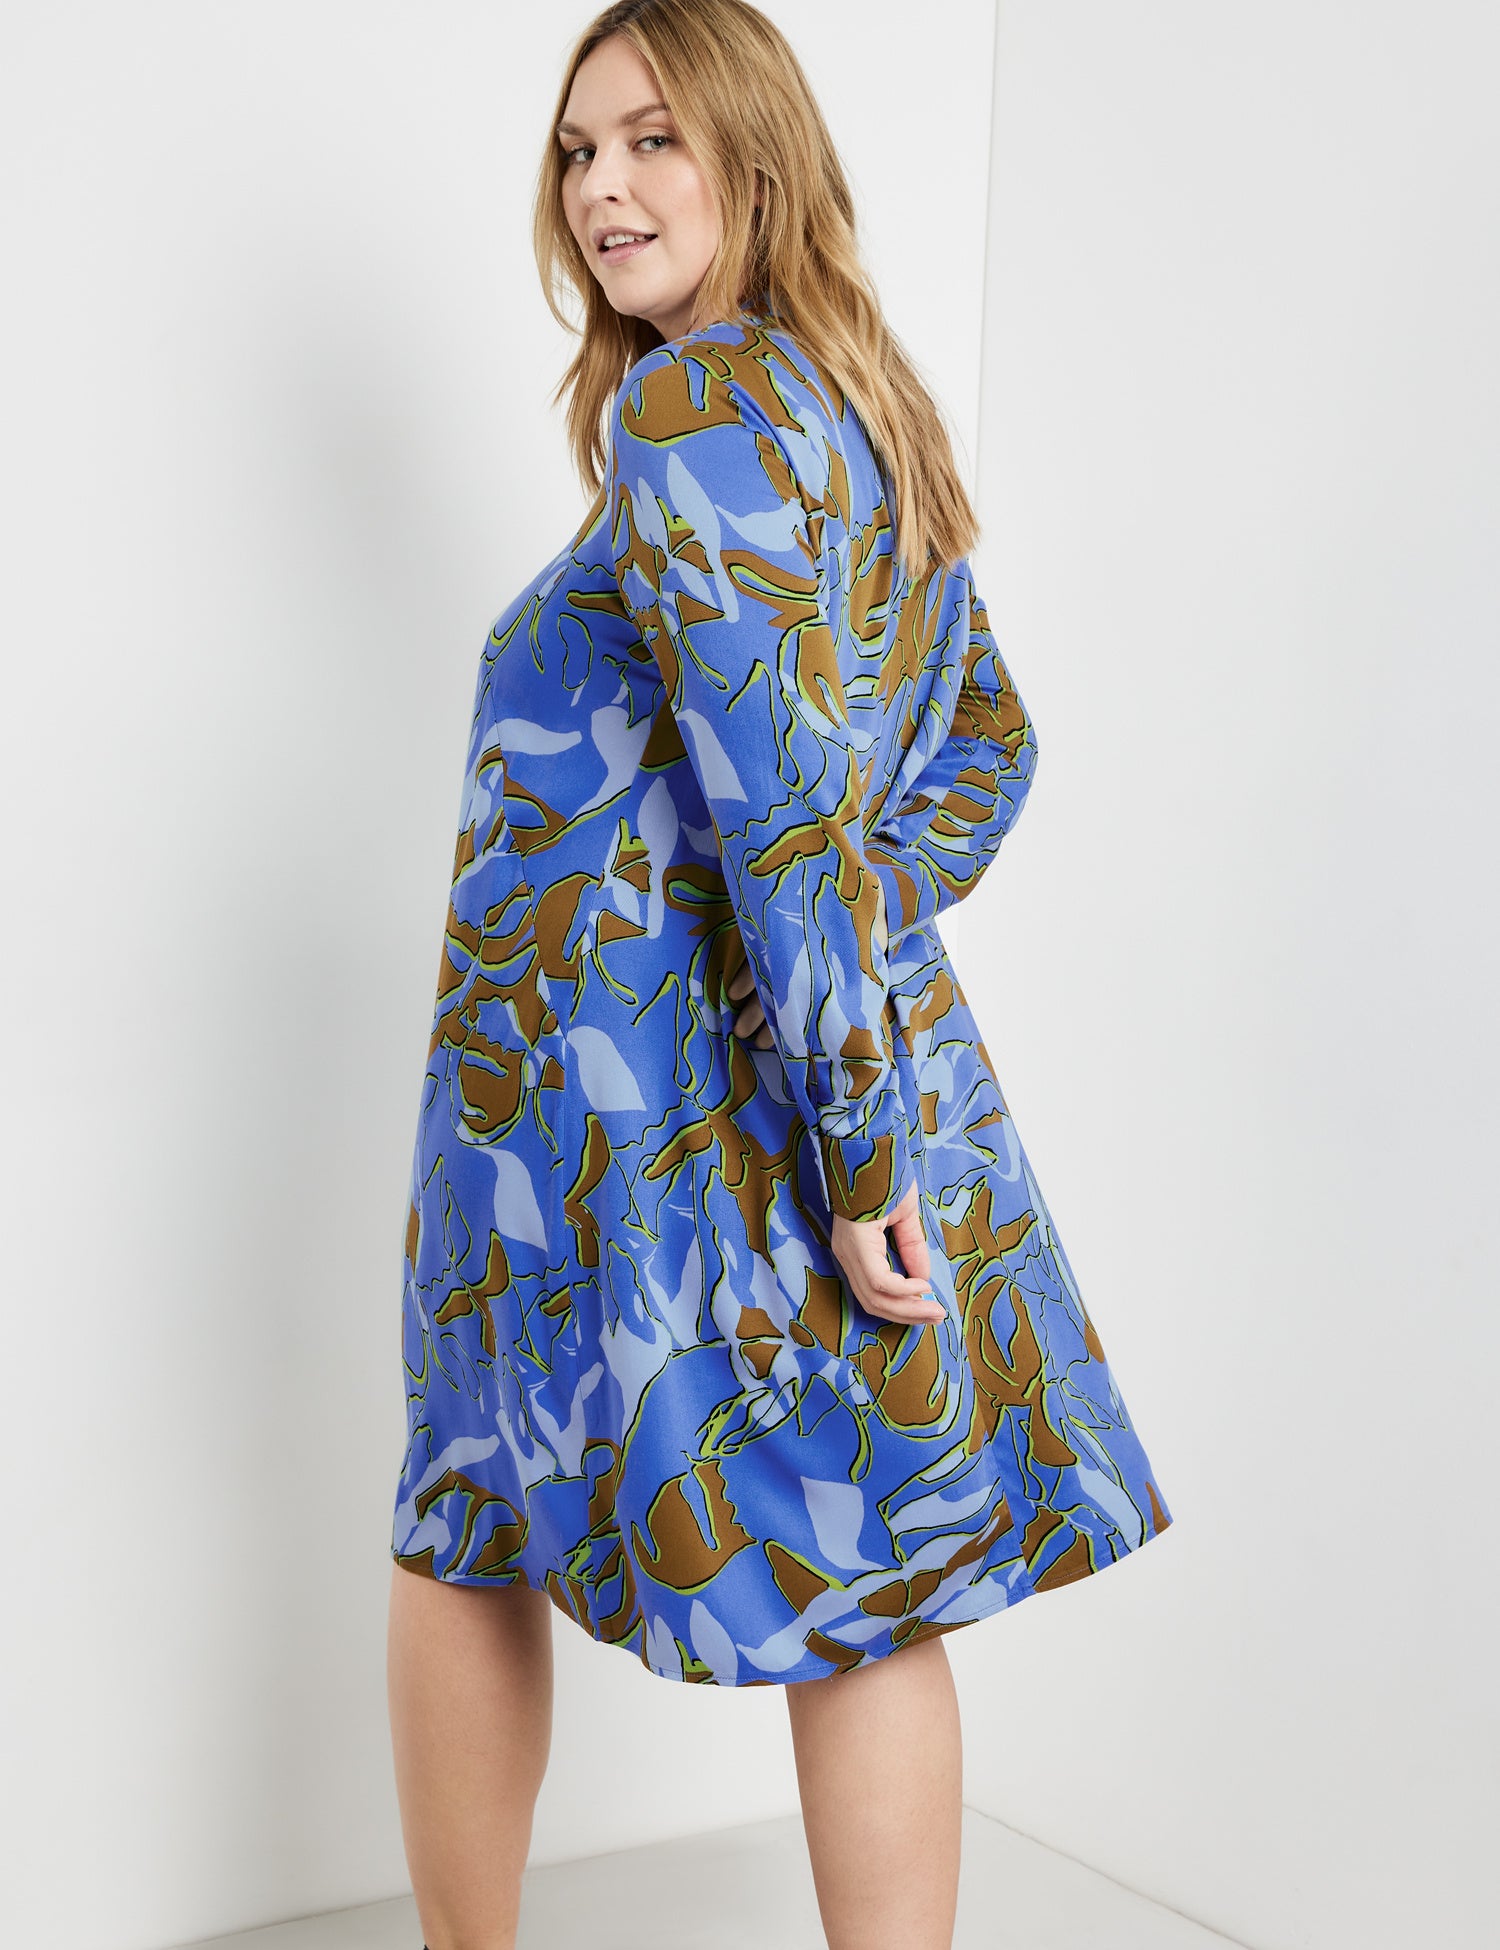 Blouse Dress With A Print